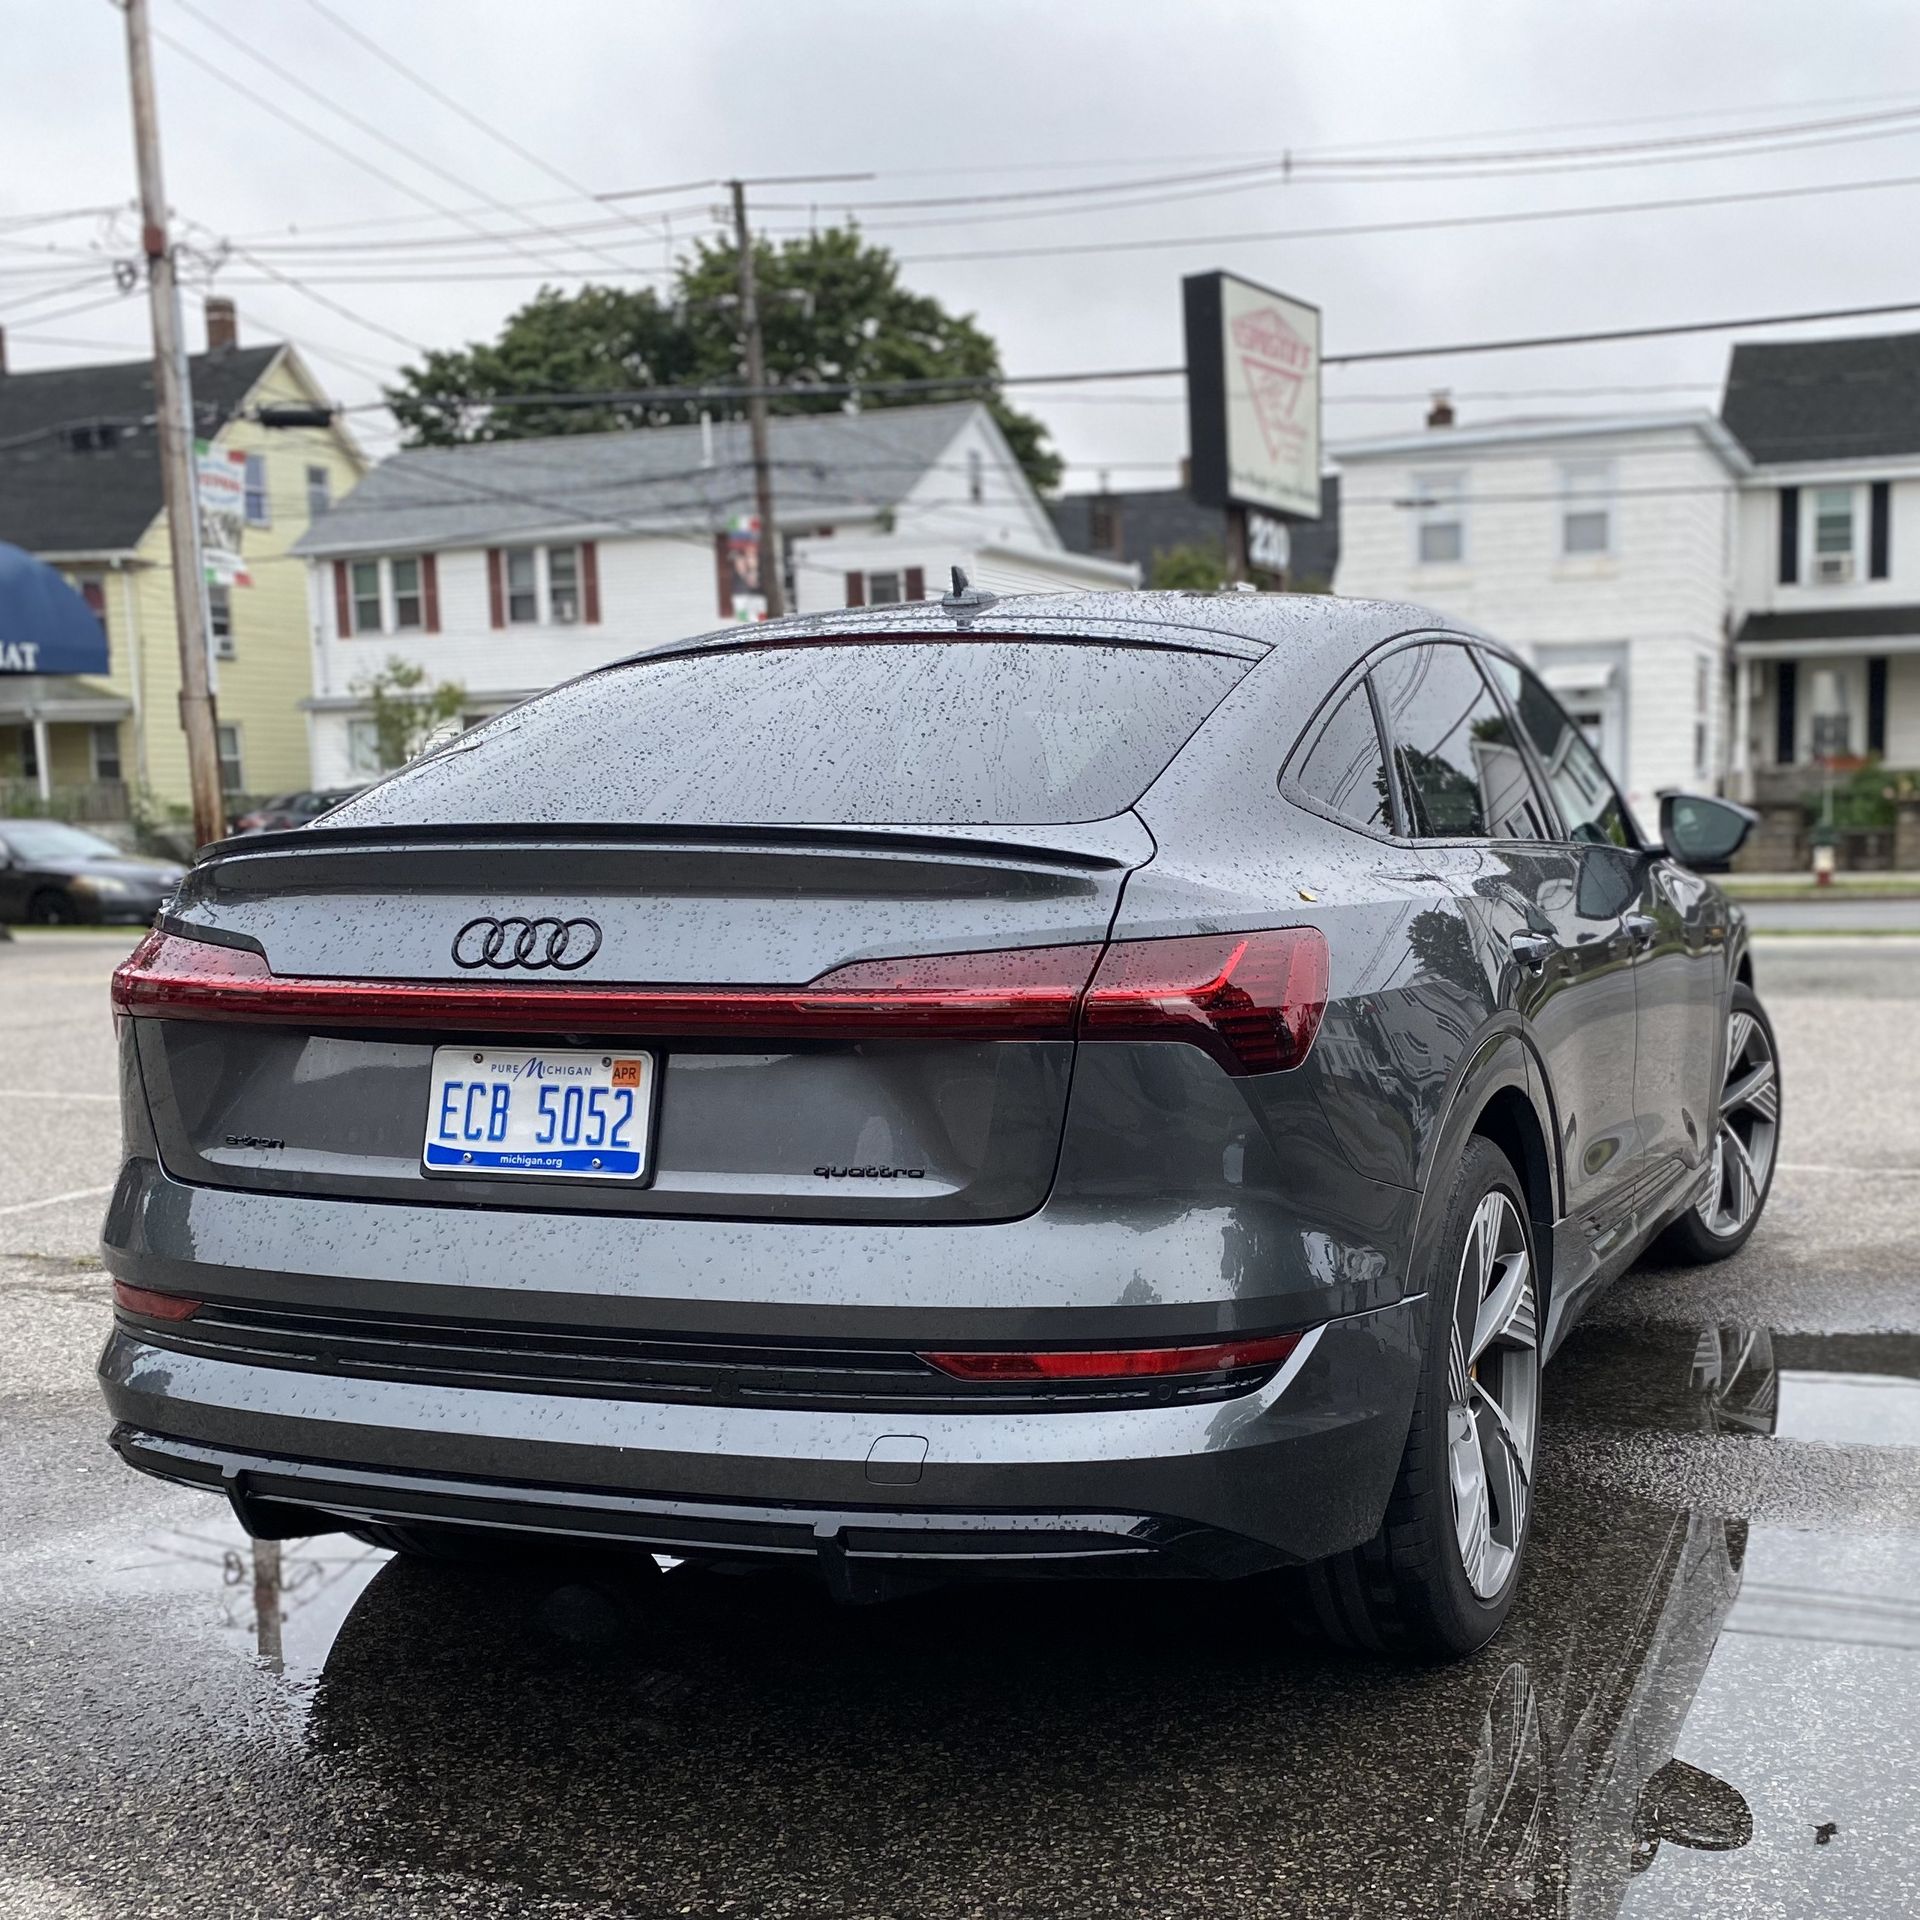 A photo of a gray Audi E-Tron Sportback, taken from the rear of the car, in a parking lot.